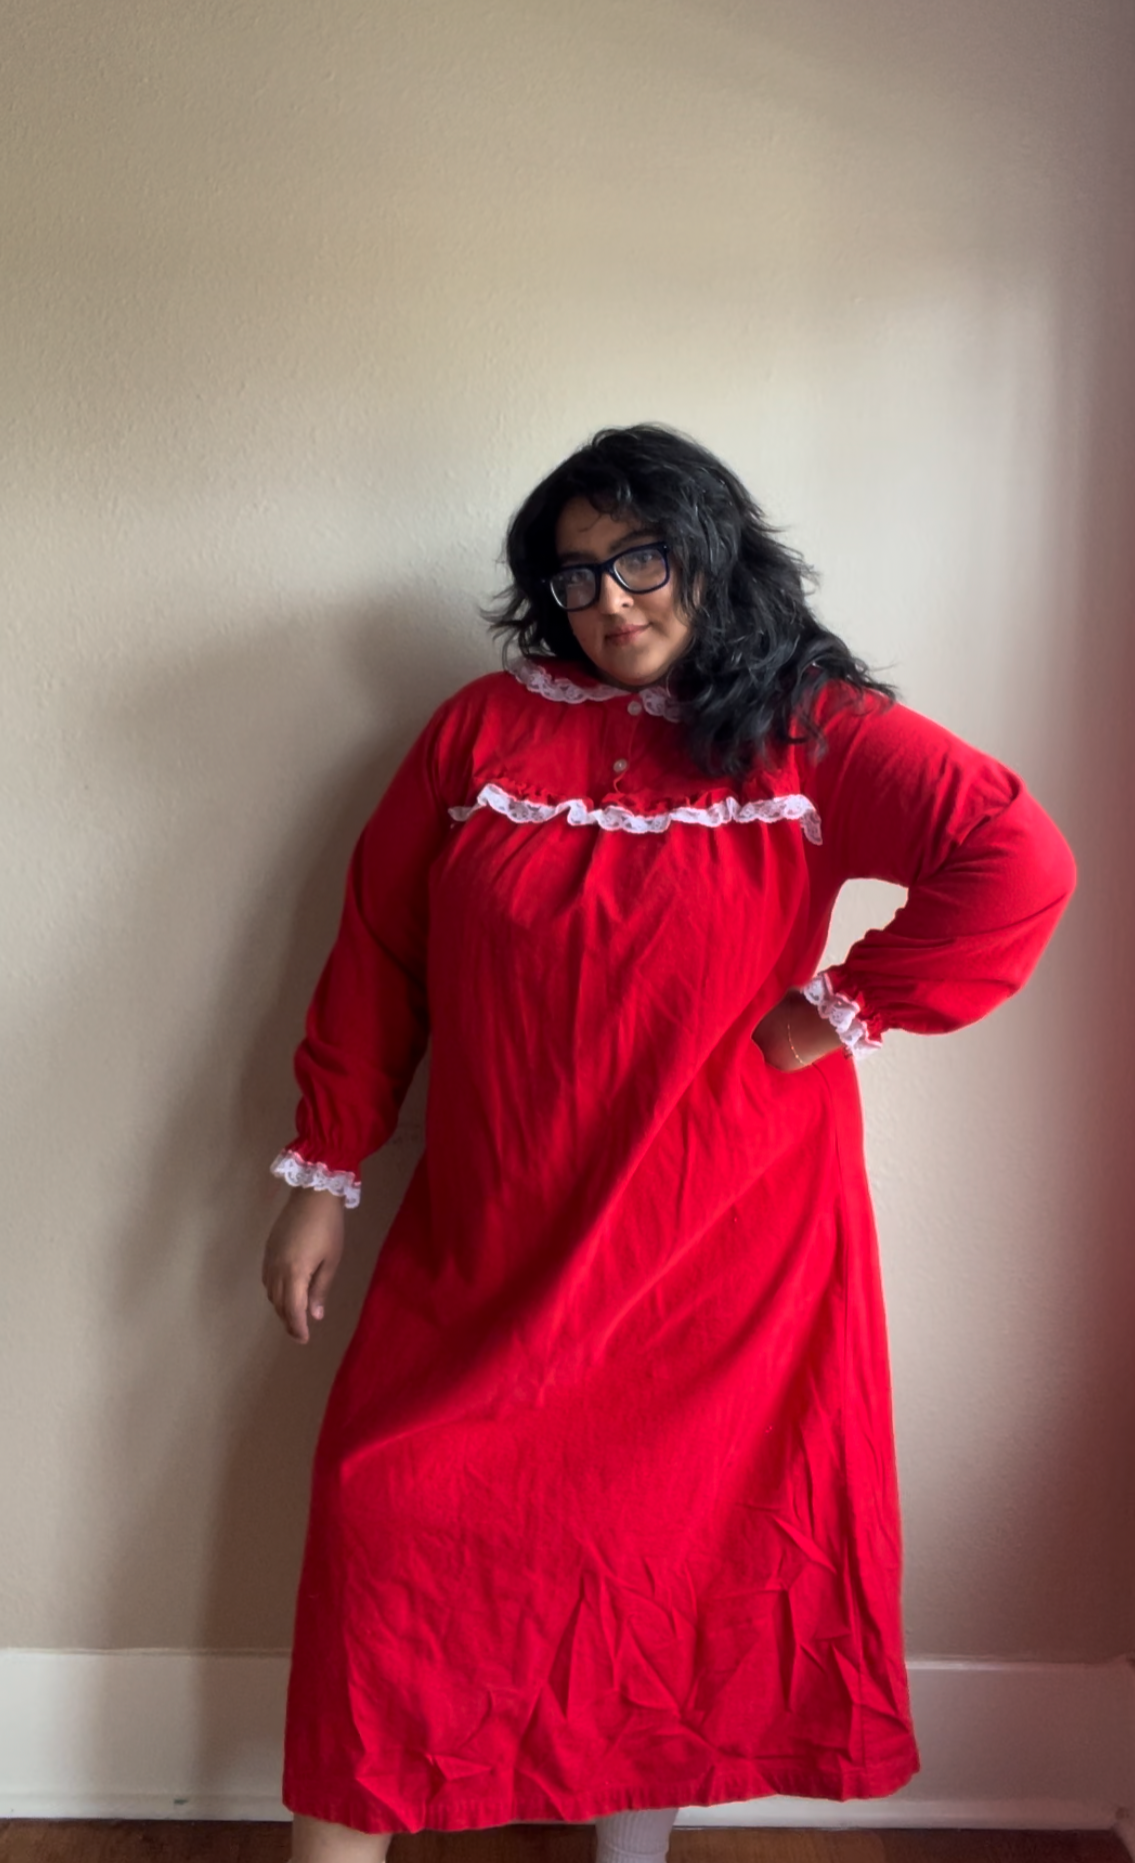 Vintage Red Cozy Nightgown/Dress